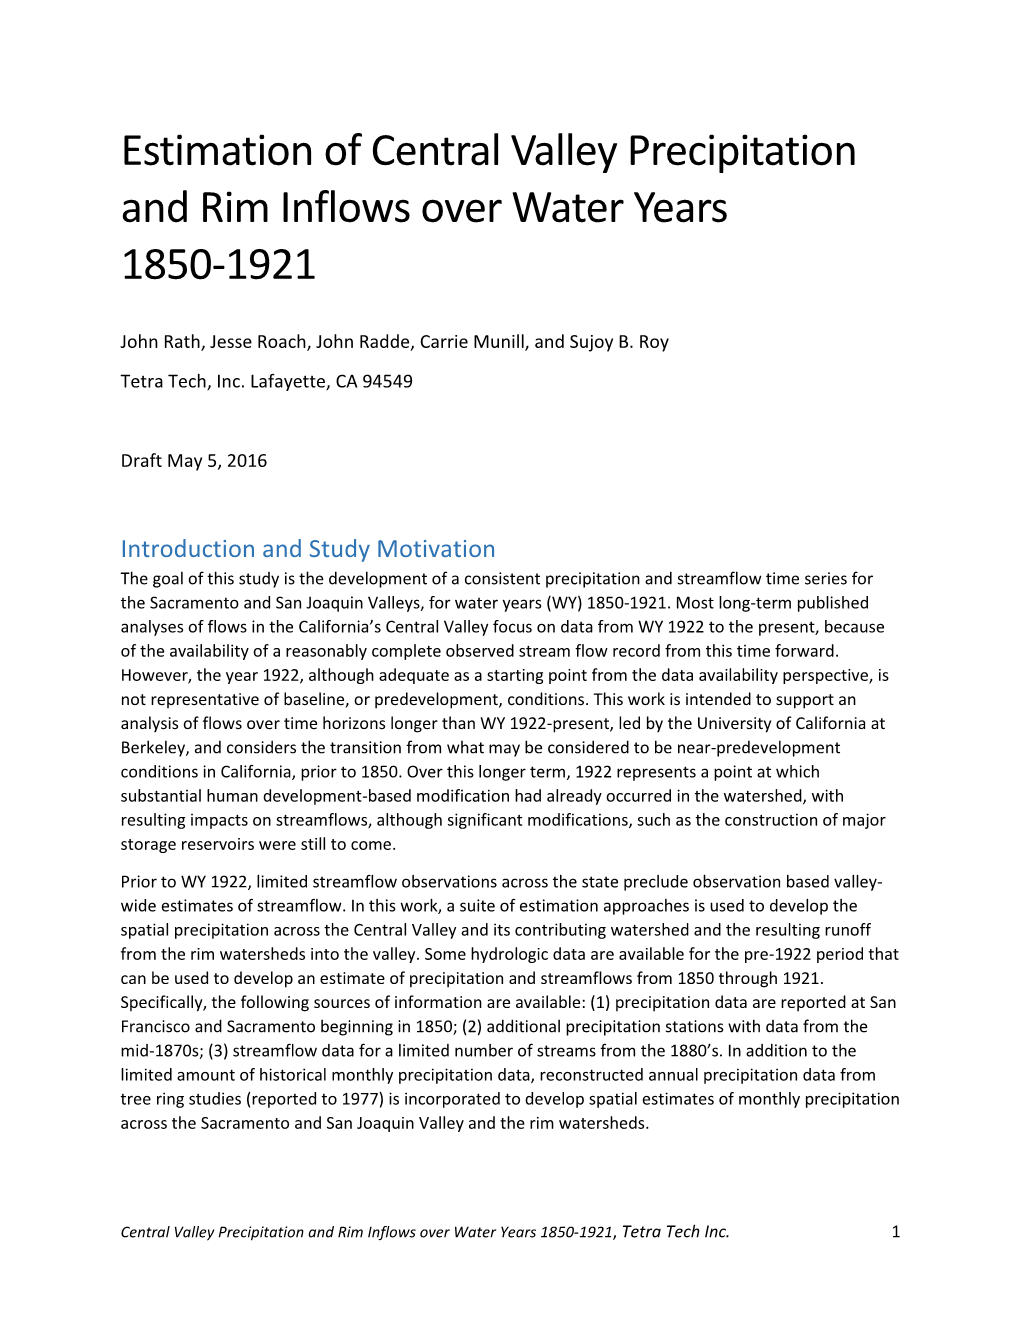 Estimation of Central Valley Precipitation and Rim Inflows Over Water Years 1850-1921